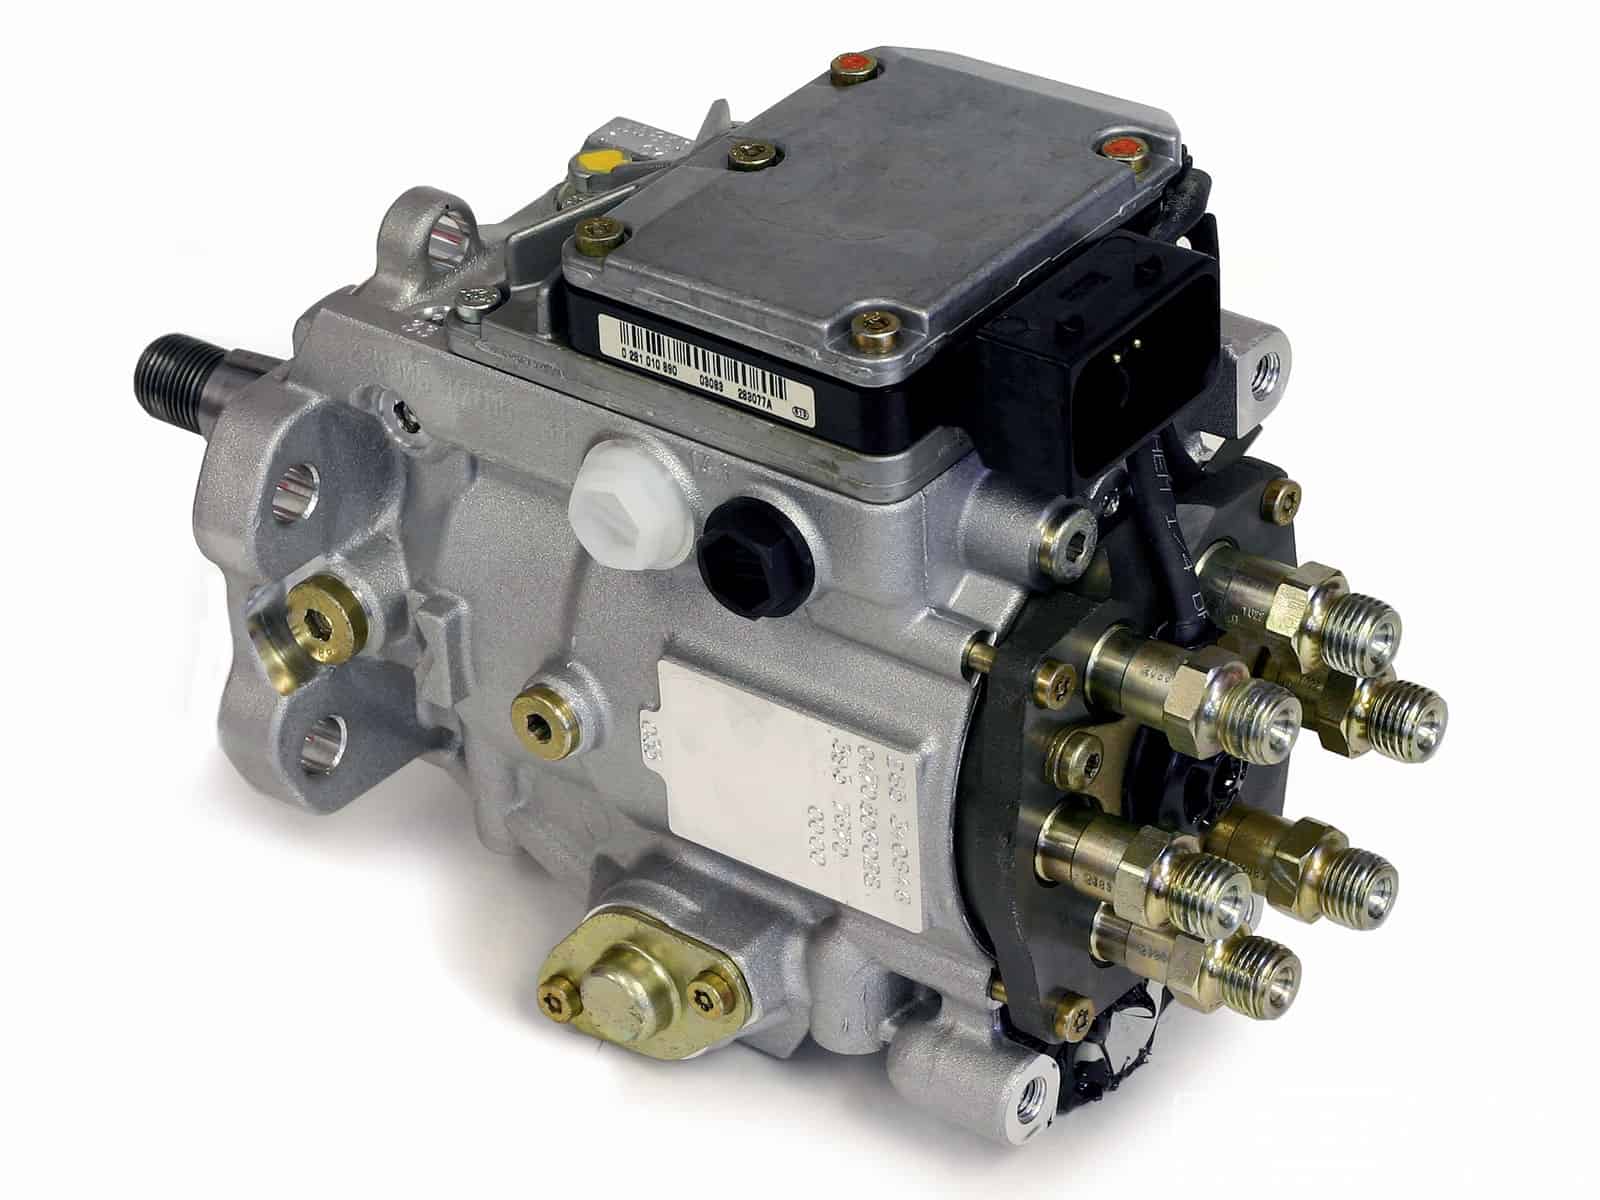 What is a vp44 injection pump?